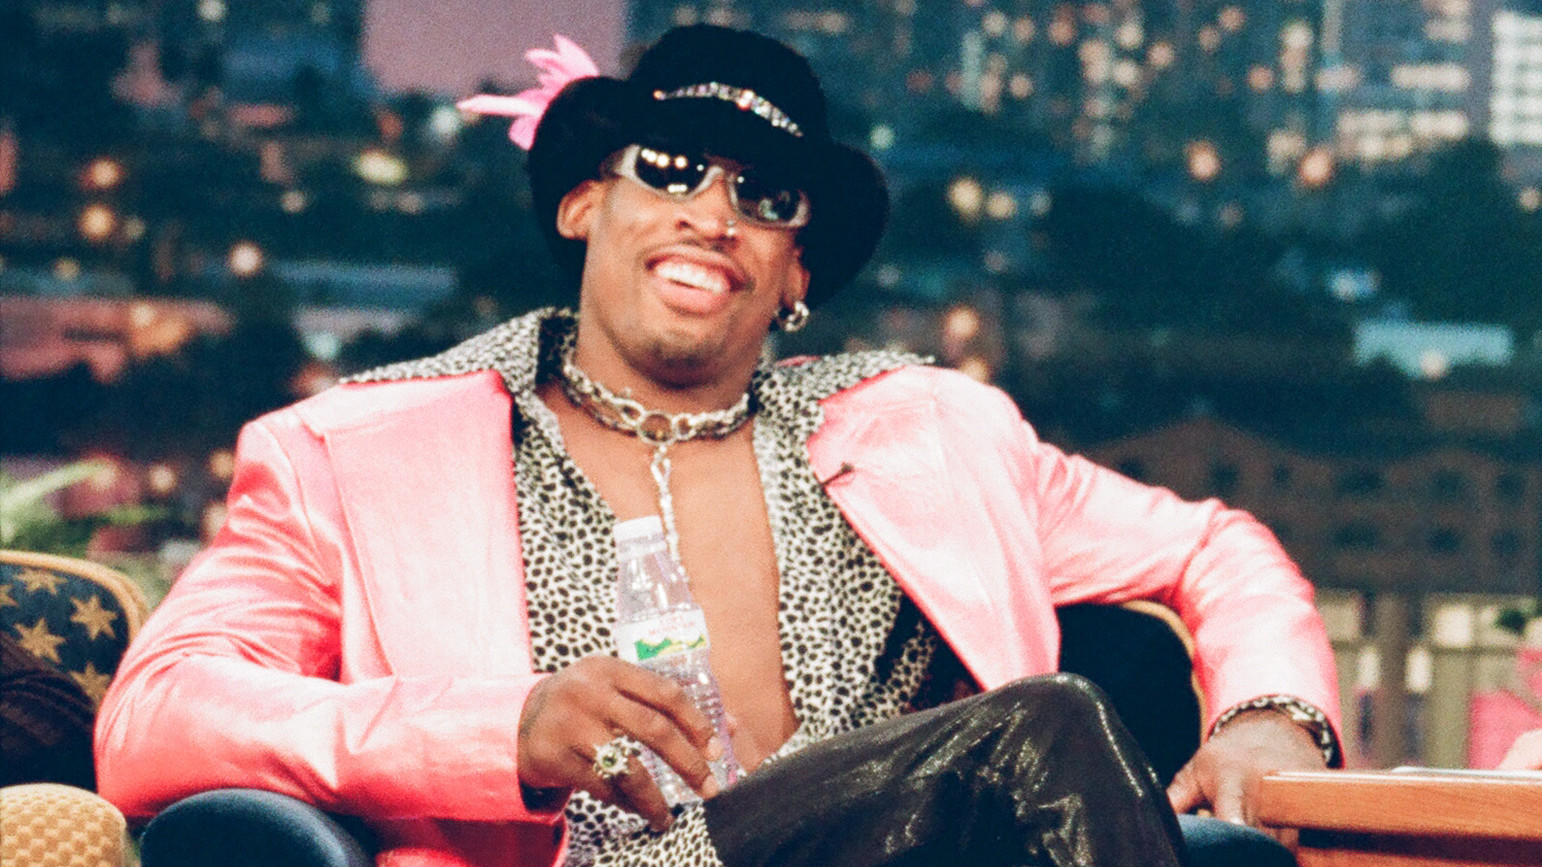 Dennis Rodman's Weird '90s Style Is Everything We Need Right Now